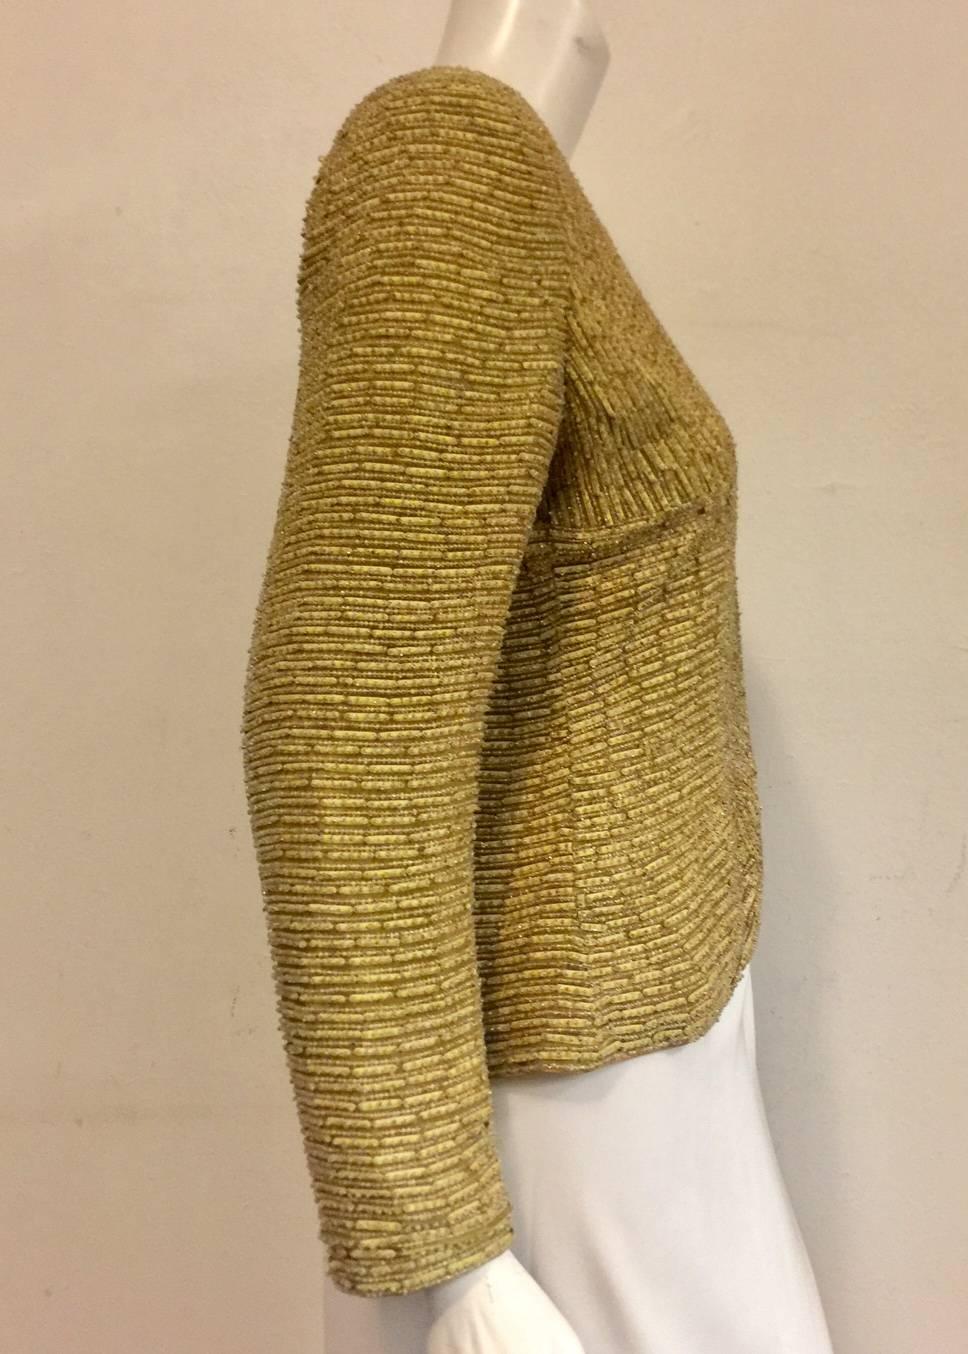 Magnificent Mary McFadden Vintage Couture Jacket adds value to any woman's wardrobe!  This beige/mustard jacket features classic tailoring, exquisite embroidery, and beautiful beadwork allover.  It is impossible to put into words the amount of work